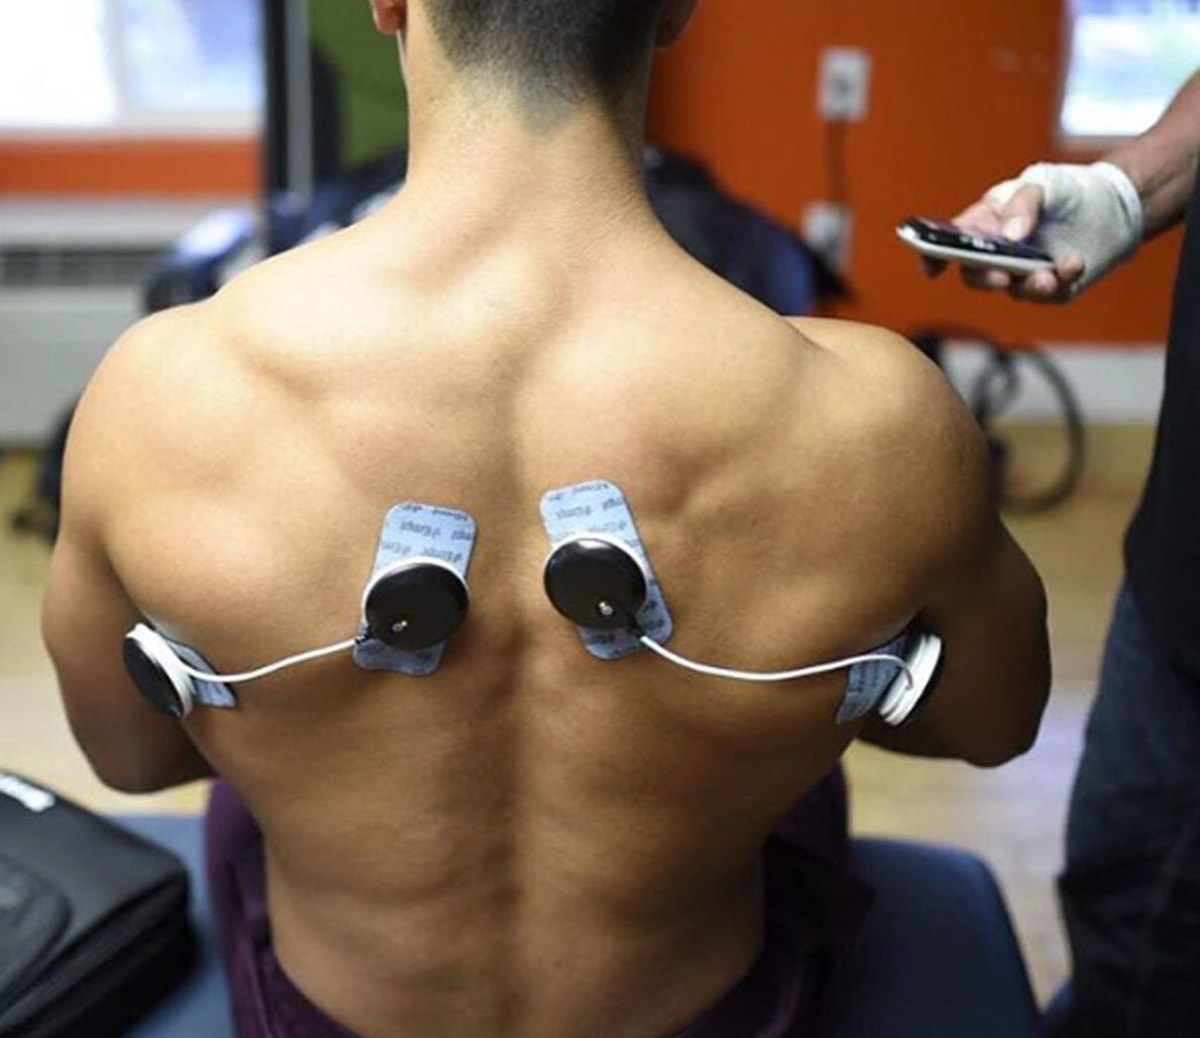 How Much Do You Really Know About Muscle Shock Therapy?